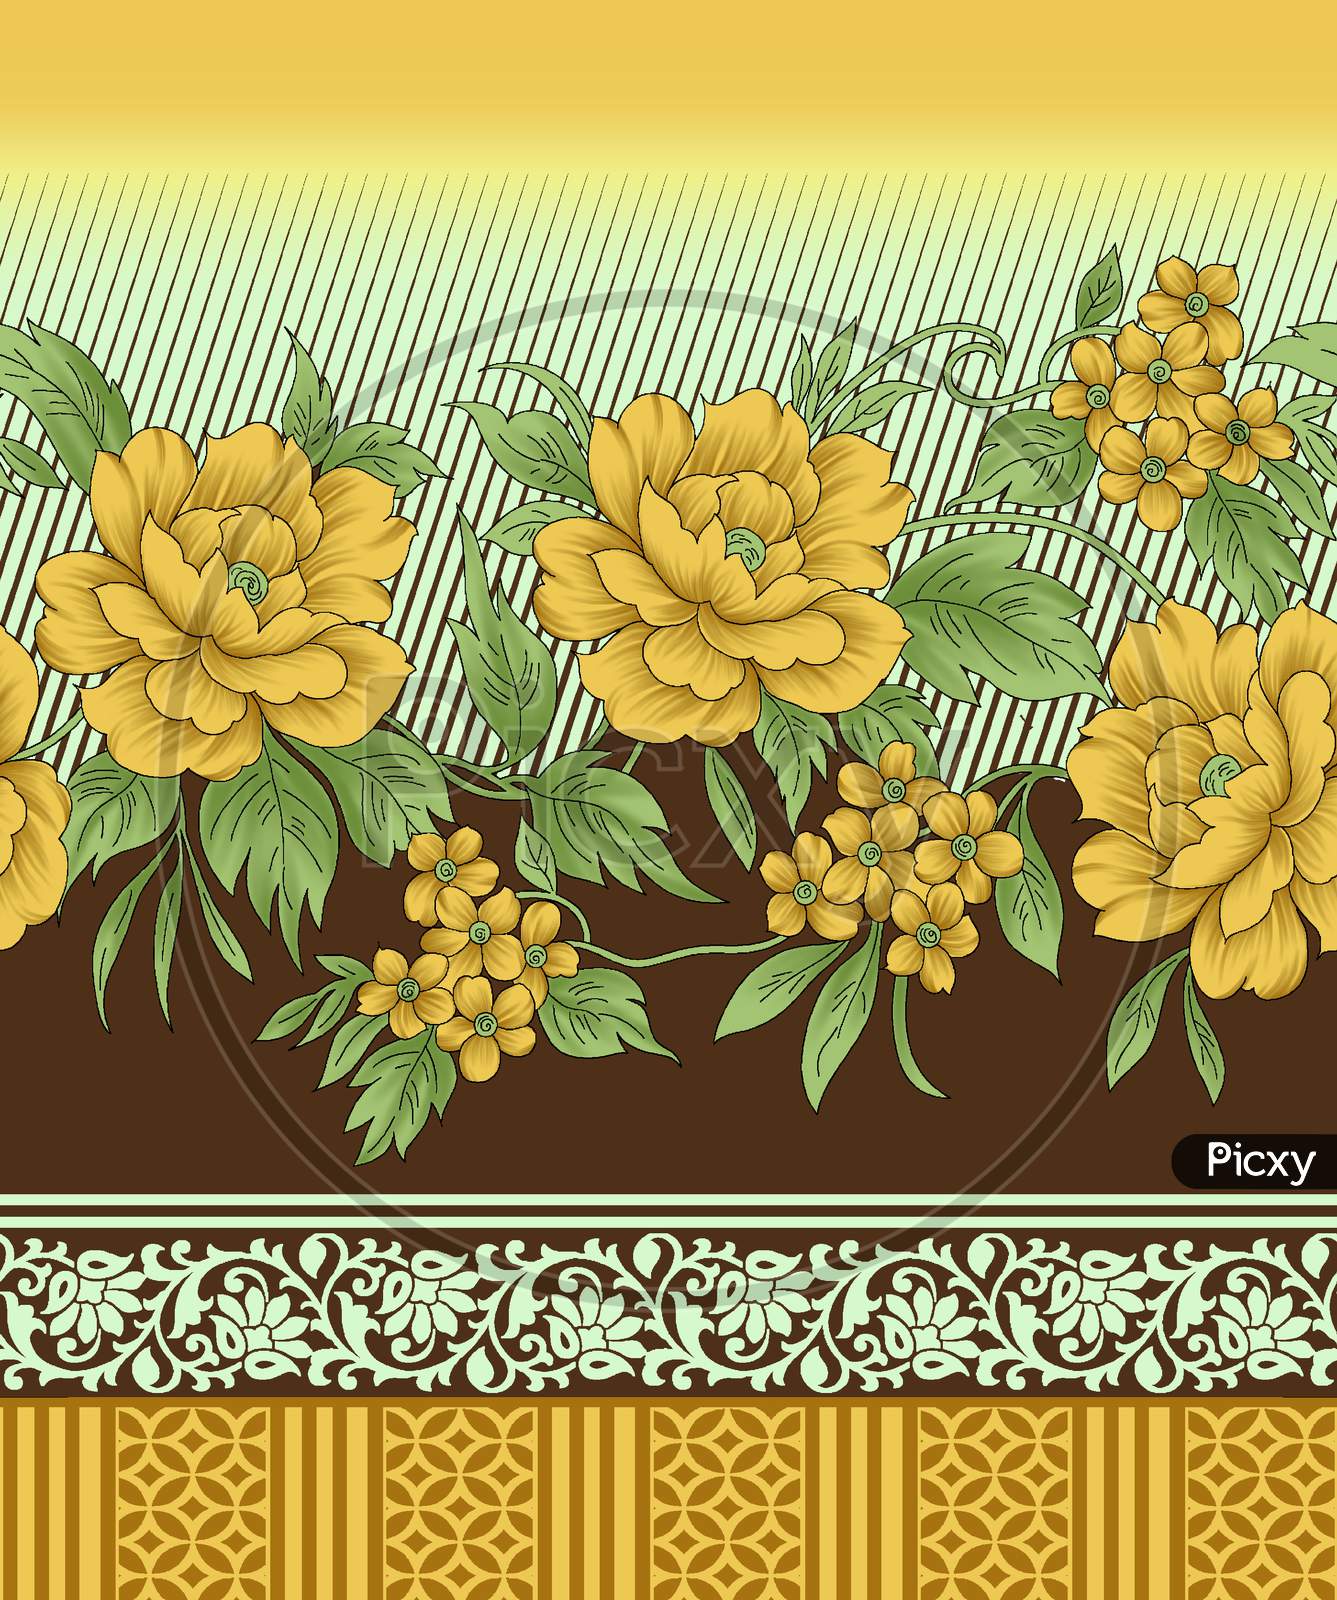 Textile Floral Border Pattern on Background Stock Vector